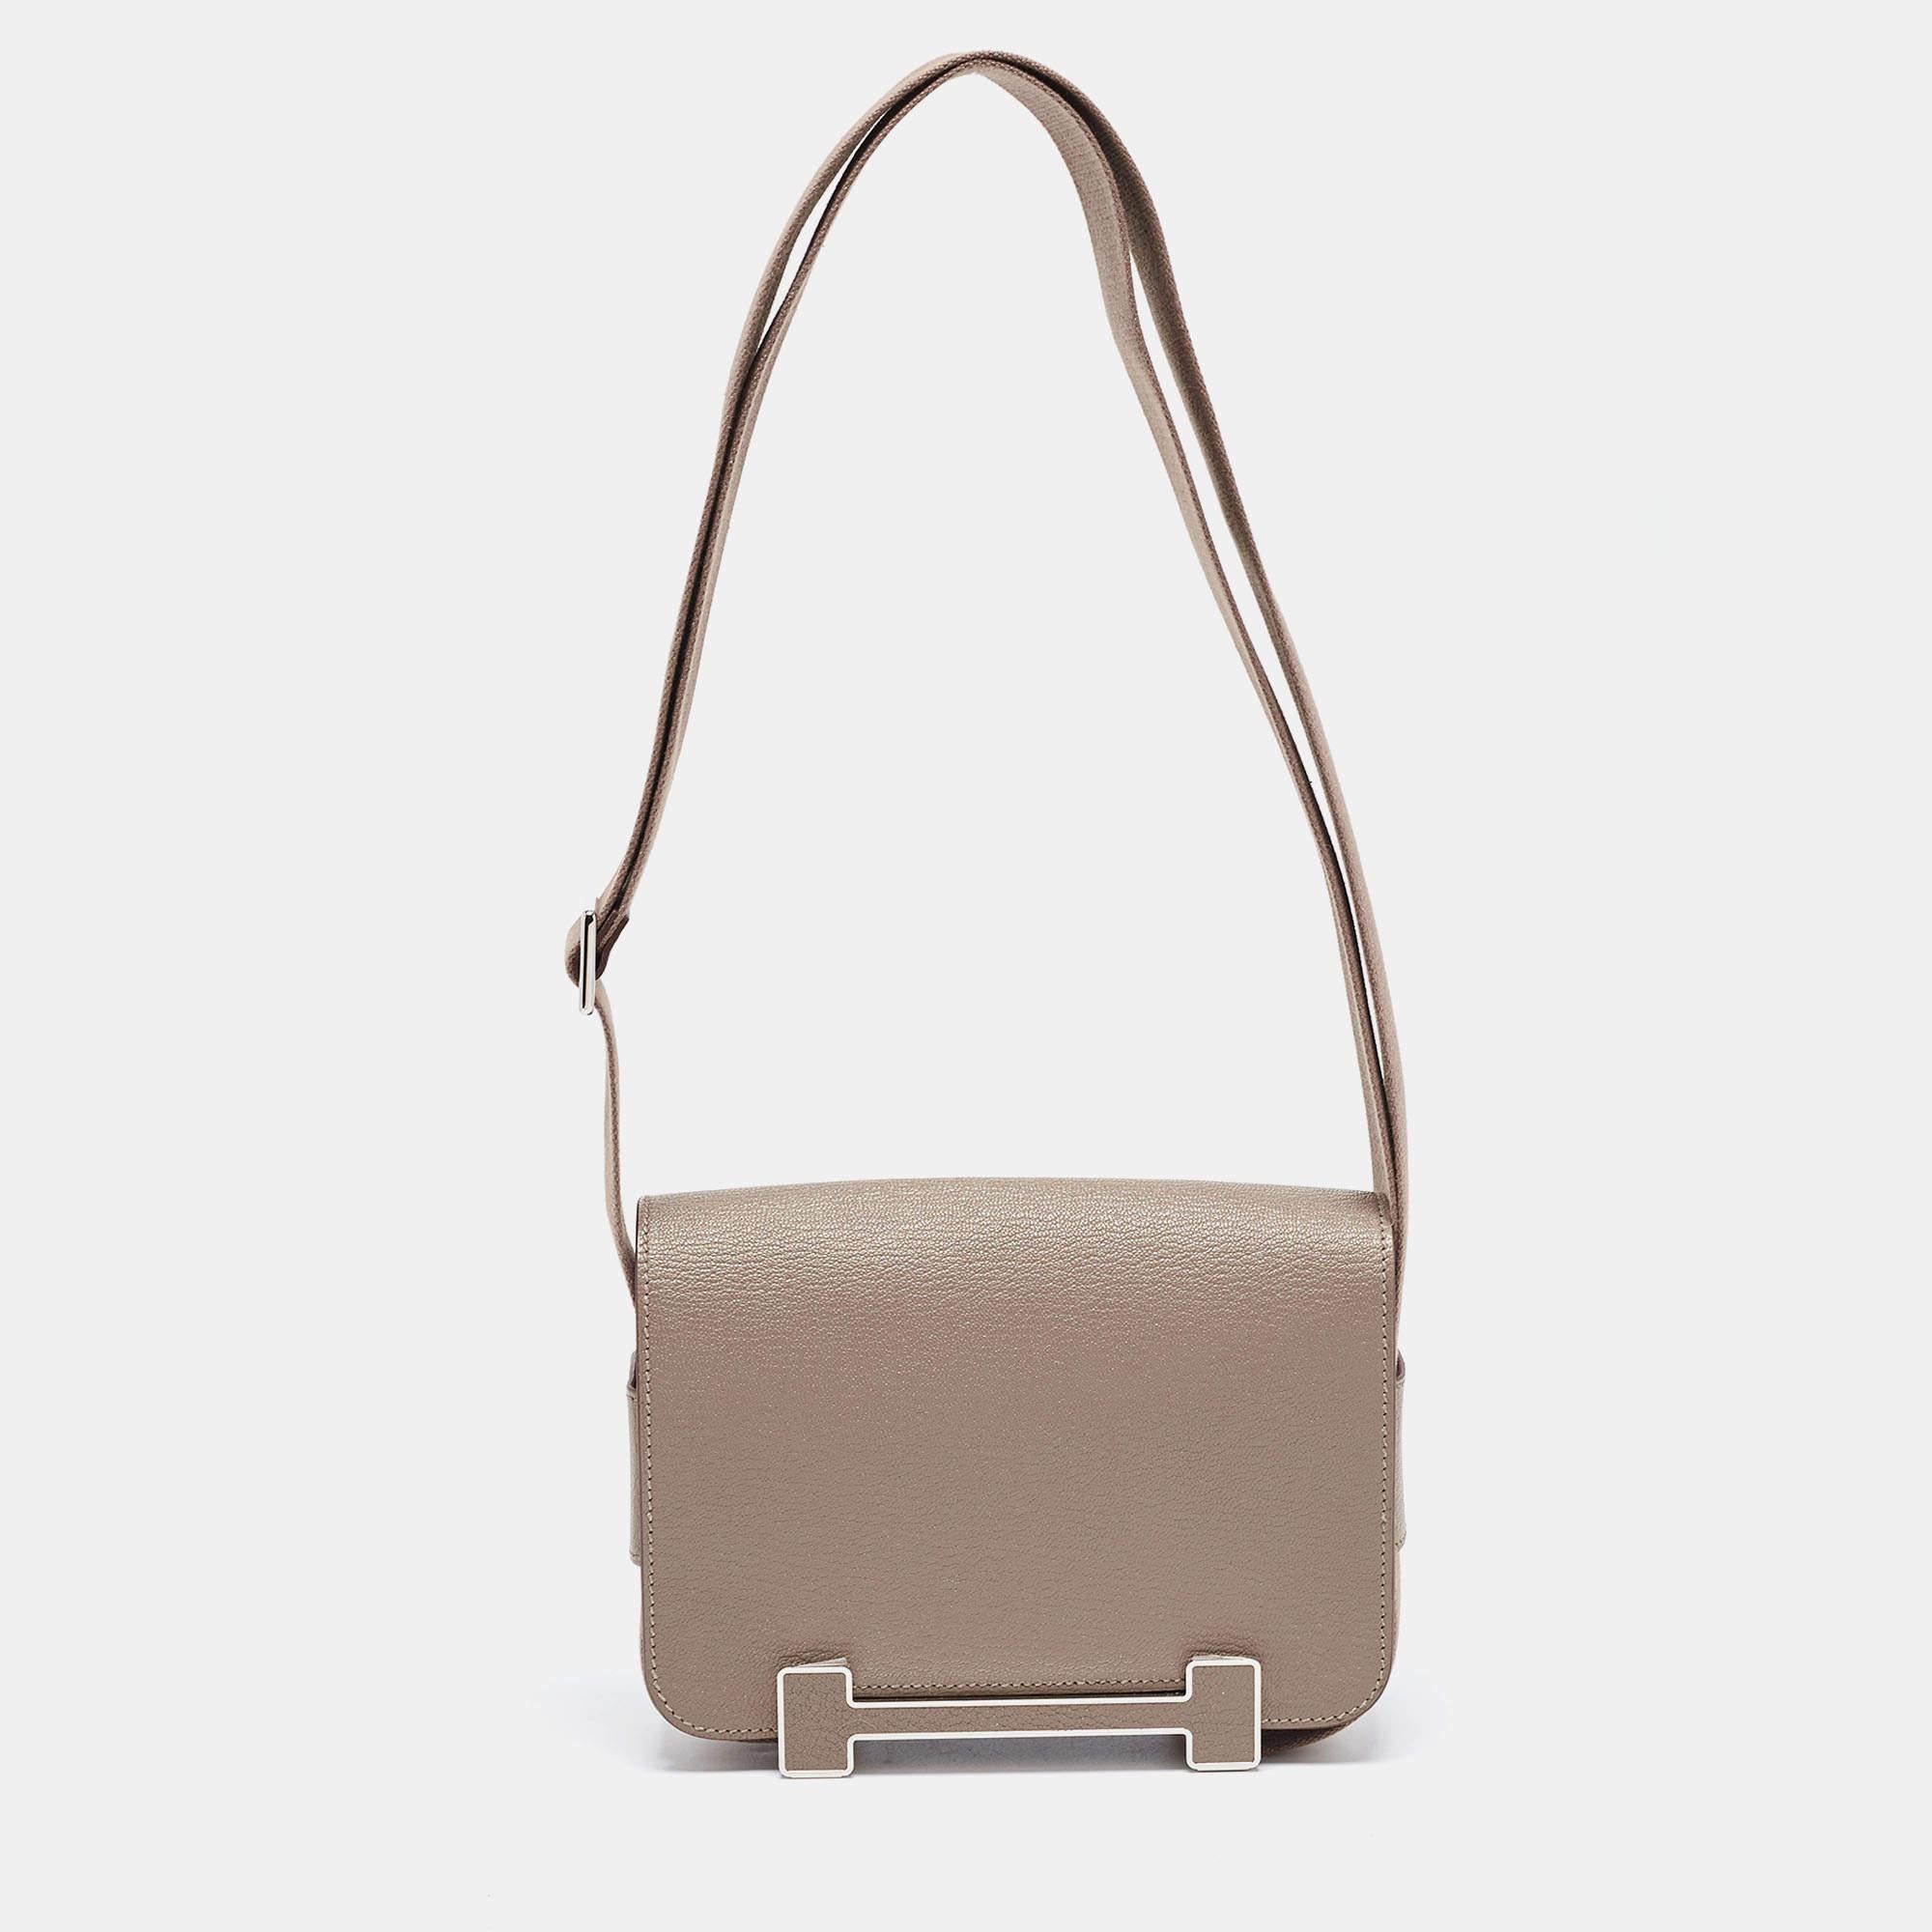 The Hermès bag is a luxurious fashion accessory. Crafted from Chèvre Mysore leather, it exudes elegance. The palladium-finished hardware adds a touch of sophistication. Its versatile design features a single strap for easy carrying, making it a